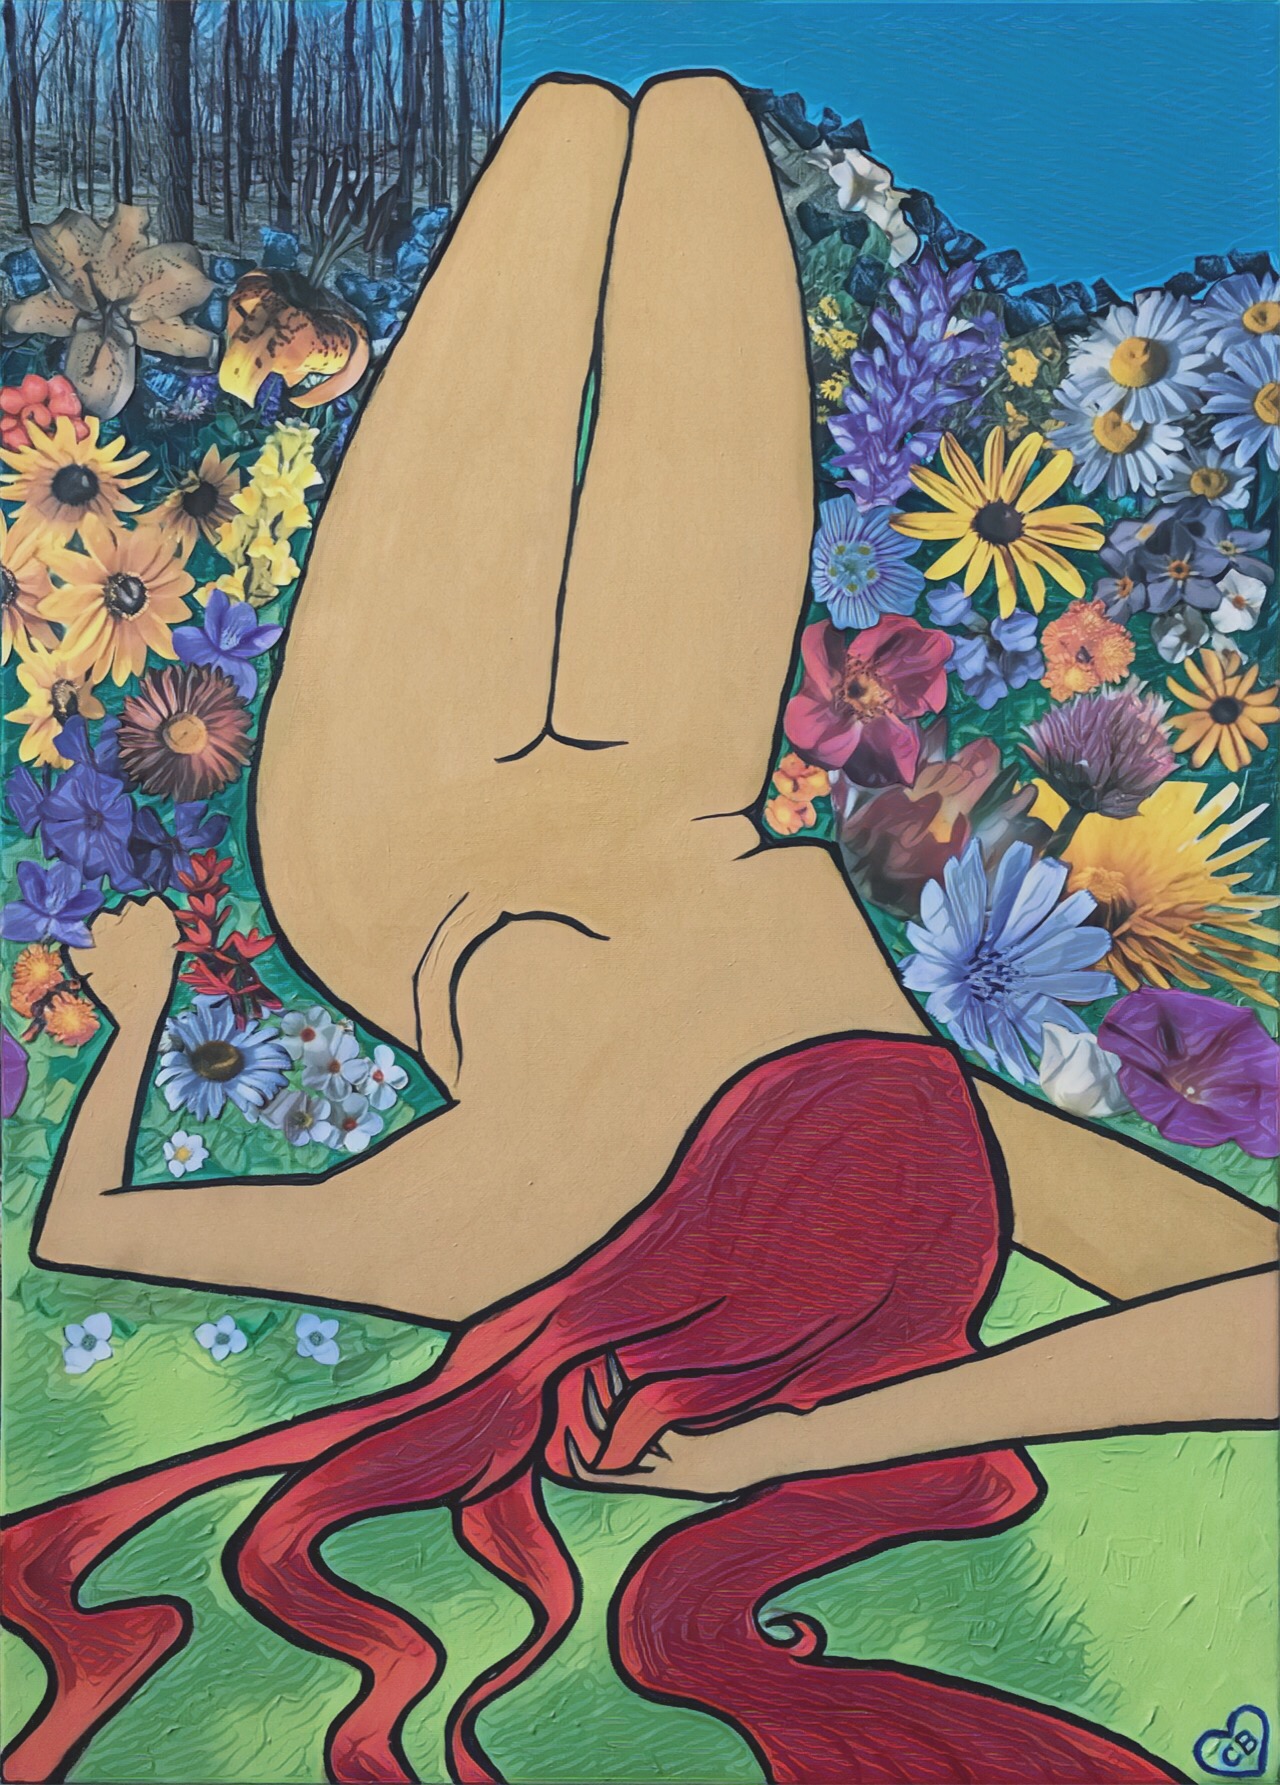 An image of a woman laying in the grass, with her hair flowing into the grass as her feet are directed towards flowers.